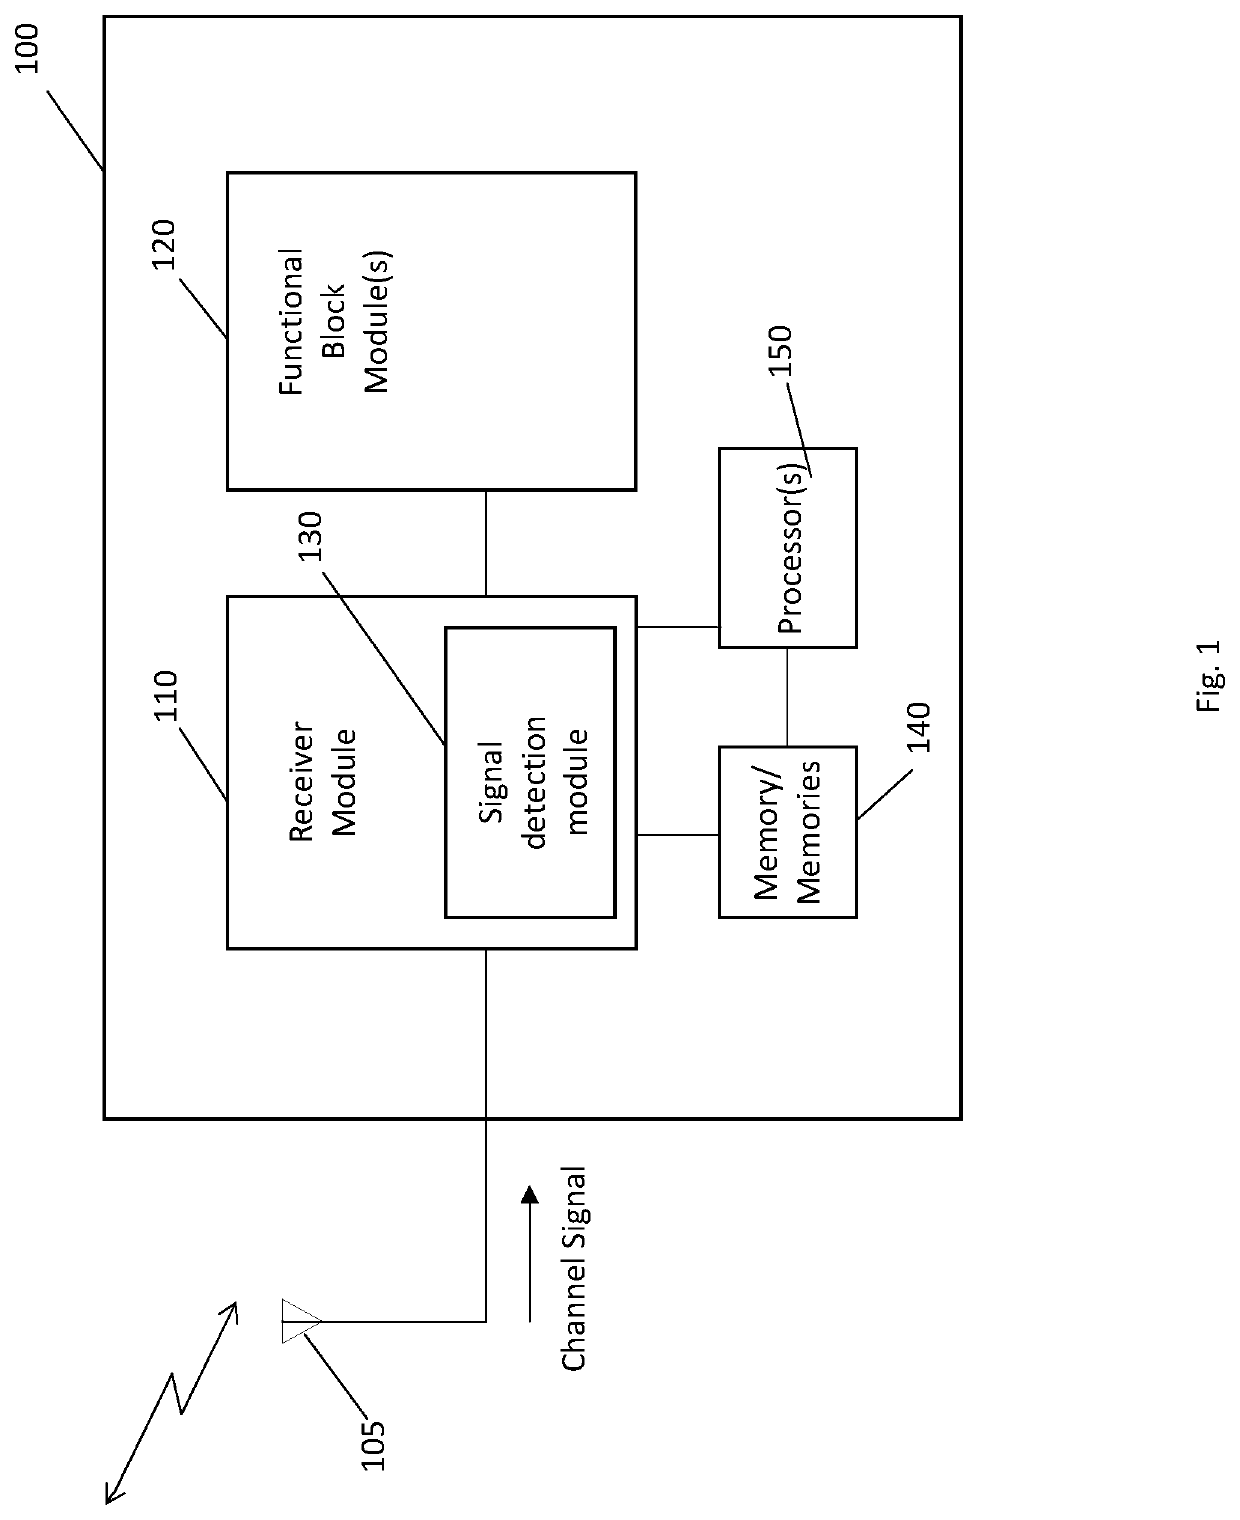 Method of Processing a Received Channel Signal in a Device to Device Communications Link